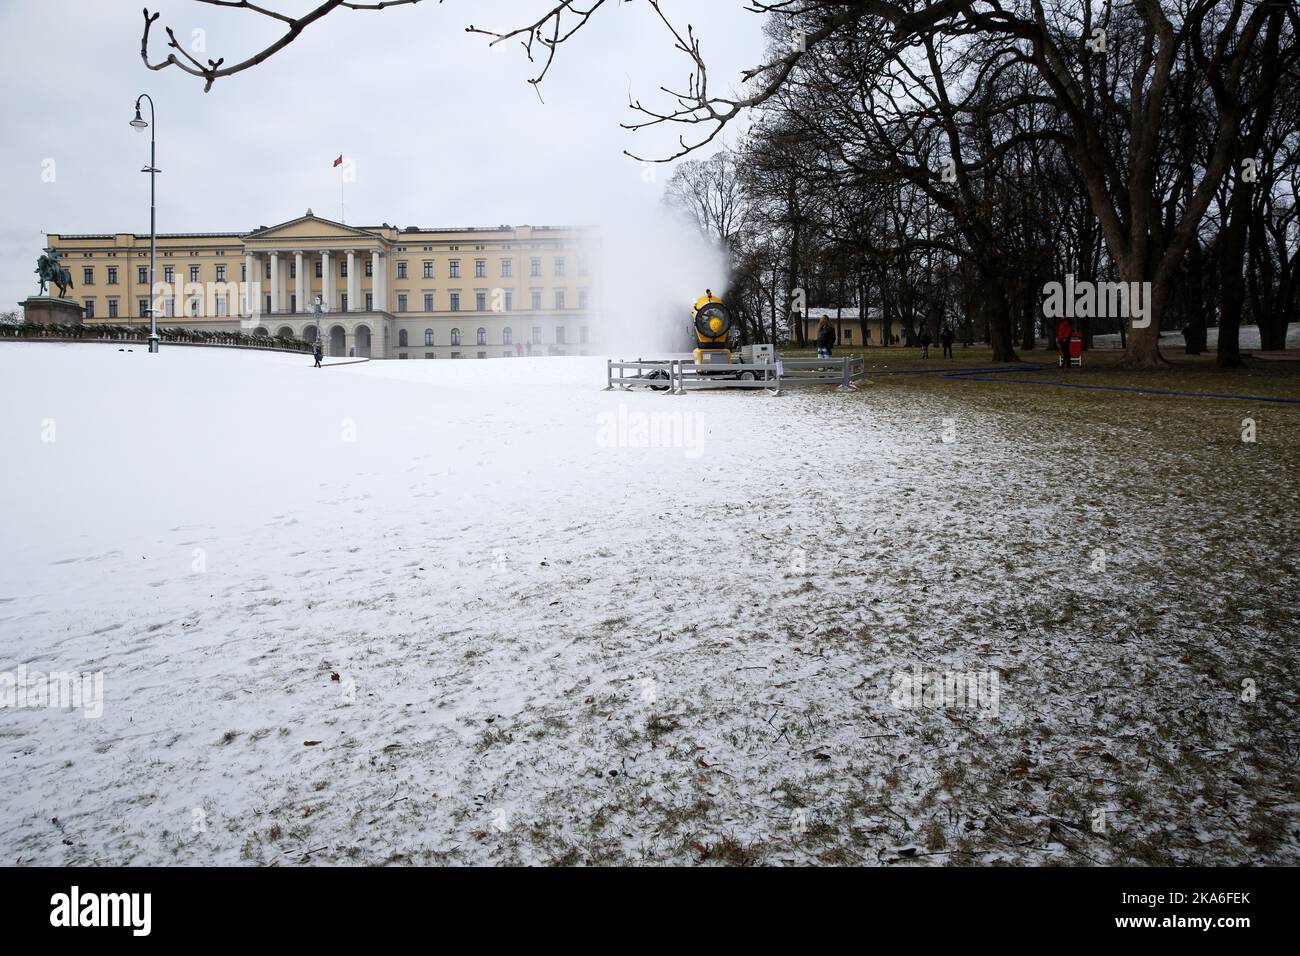 OSLO, Norway 20160104. Today's picture of NTB scanpix. A snow canon produces snow on Slottsplassen (Palace Square) in Oslo. The snow is made to an event in conjunction with Kong Harald and Queen Sonja's 25th anniversary as king and queen of Norway. Photo: Cornelius Poppe / NTB scanpix Stock Photo